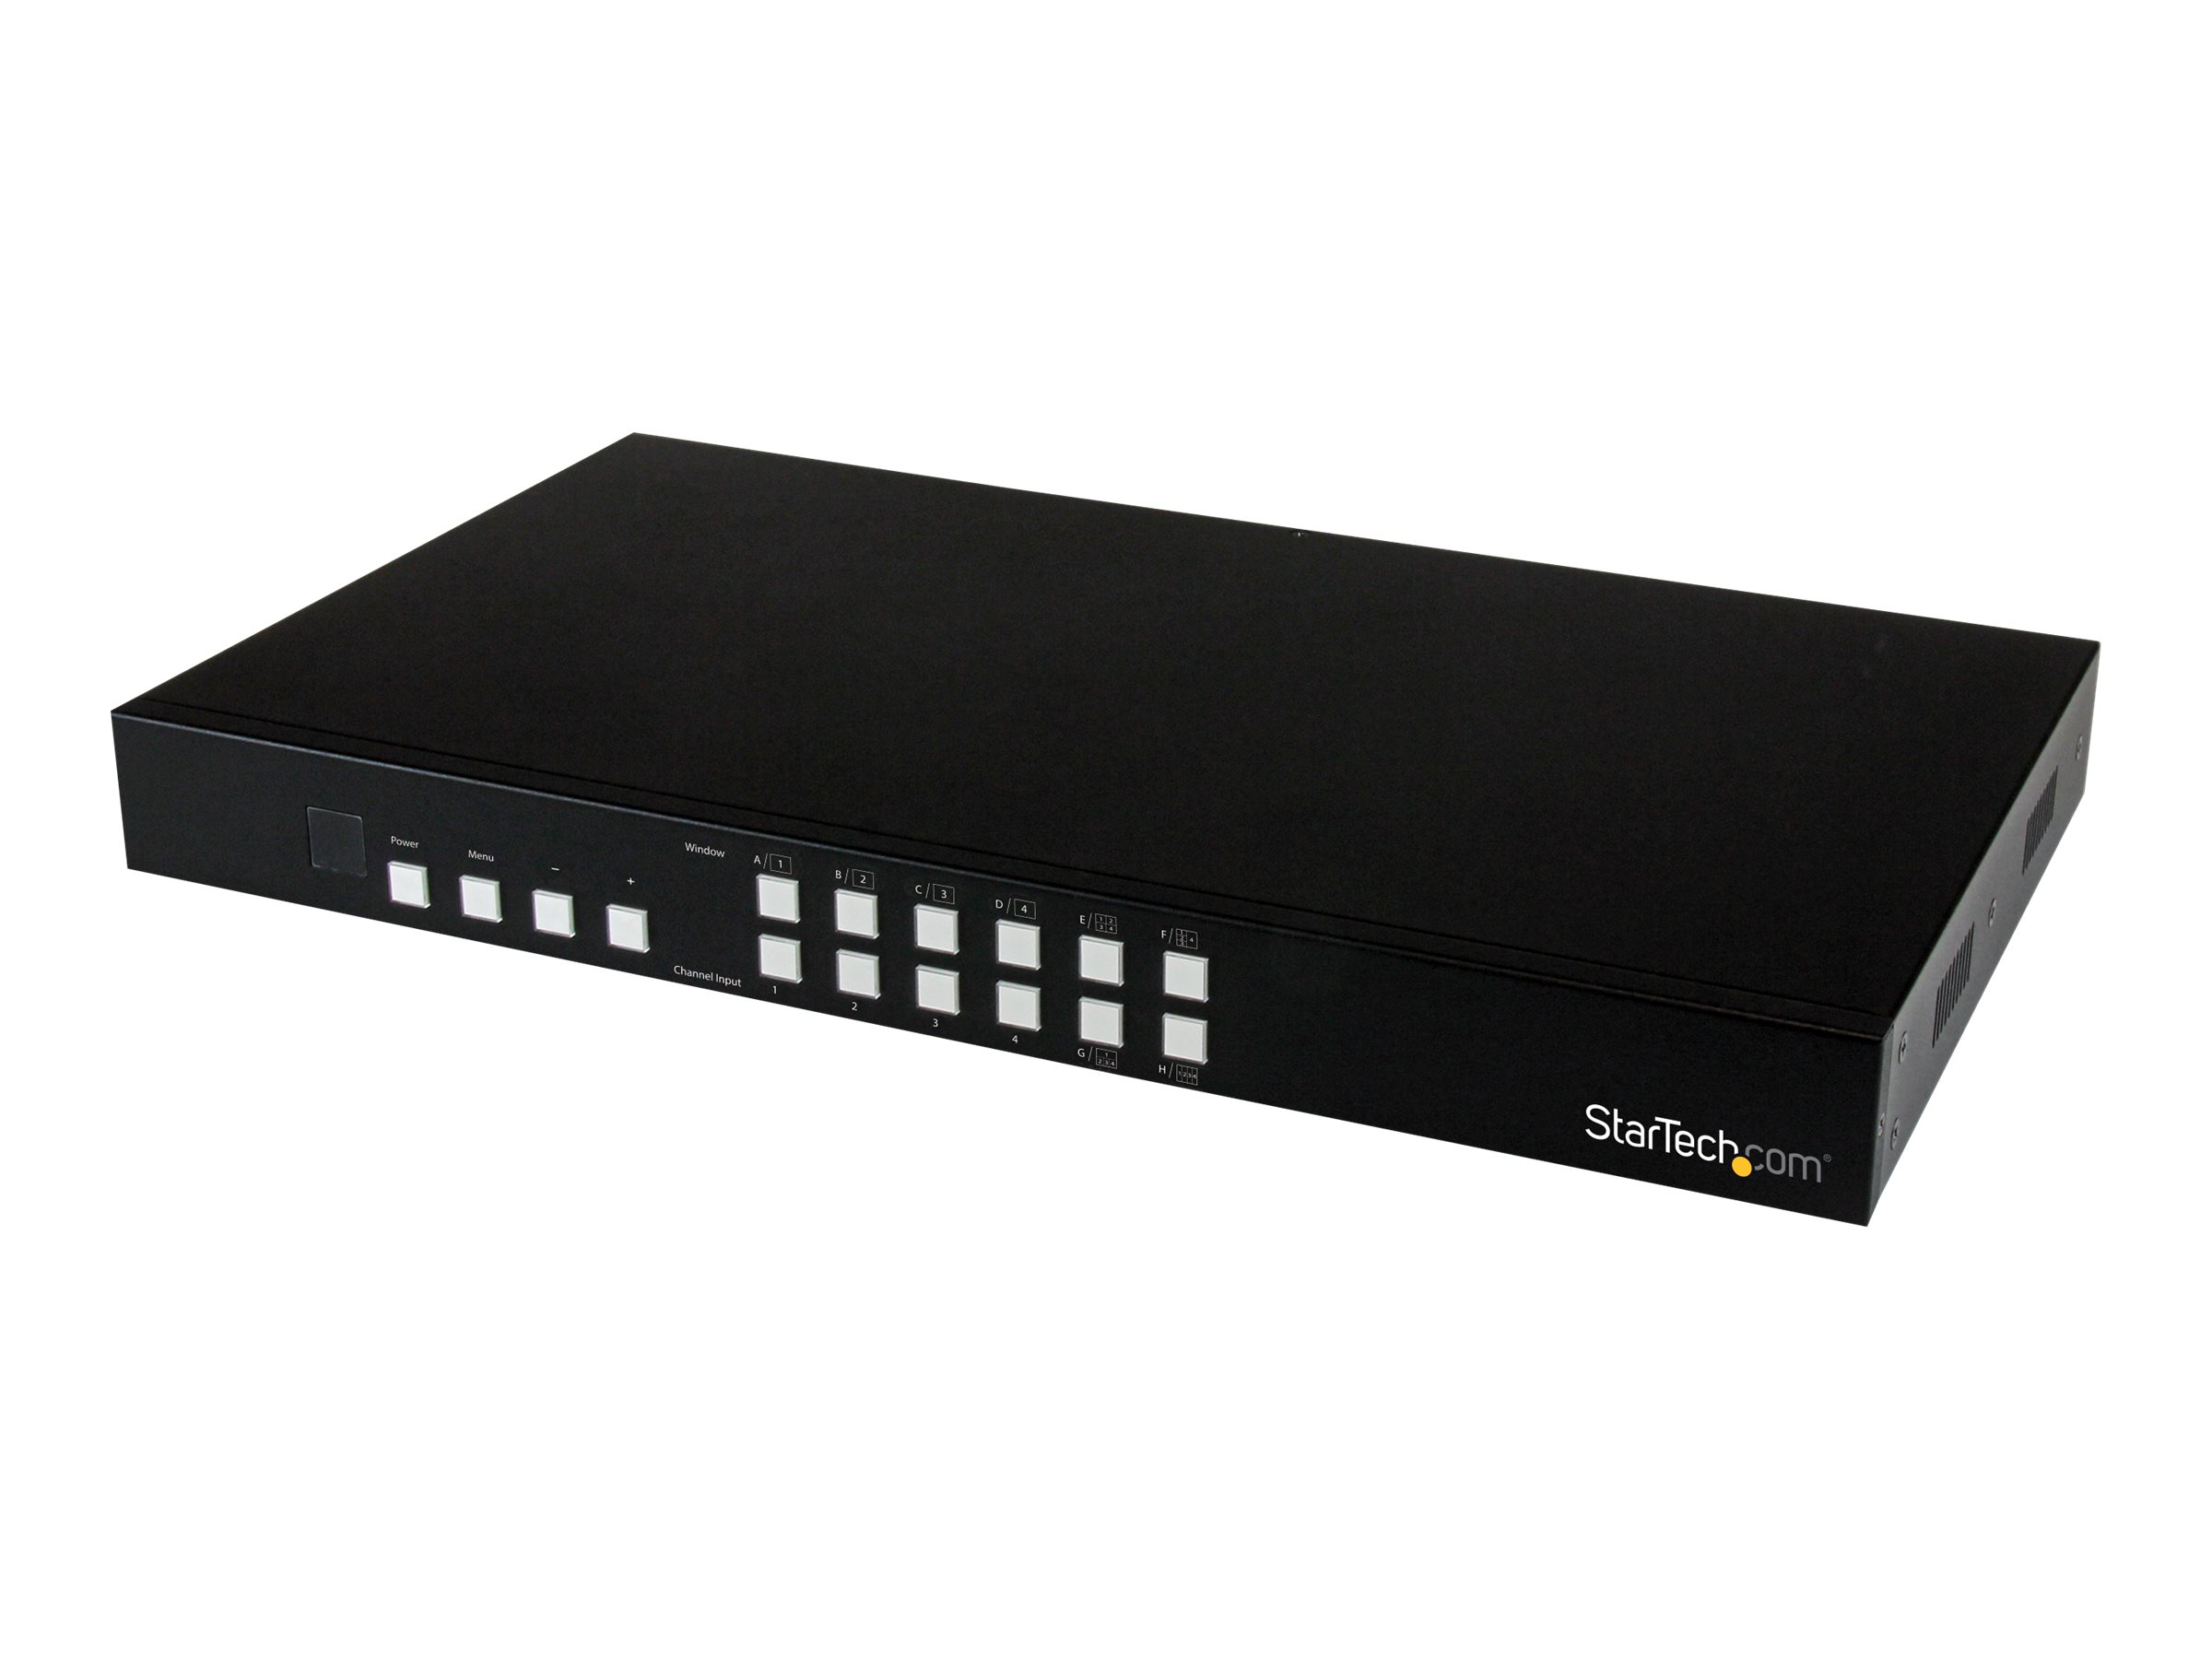 2x2 HDMI Matrix Switch - 4K with Fast Switching and Auto-Sensing